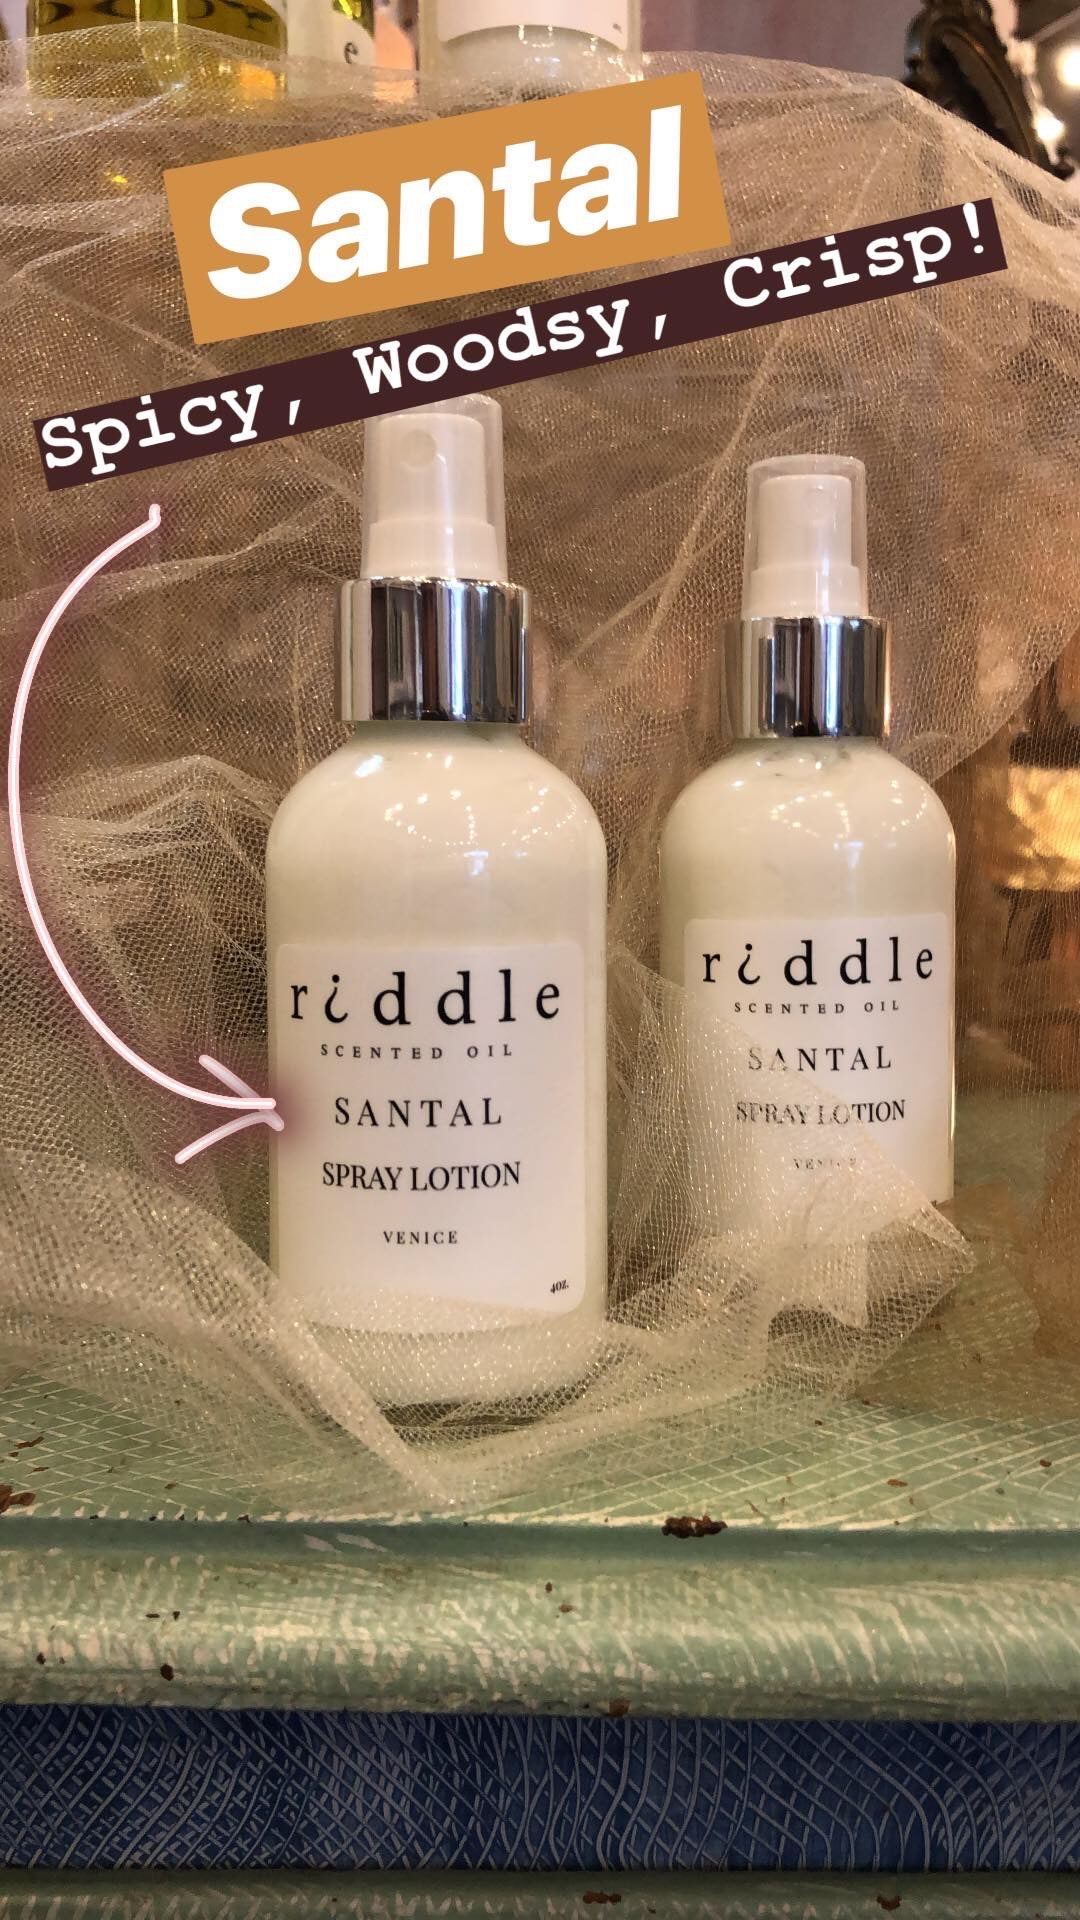 Riddle Spray Lotion